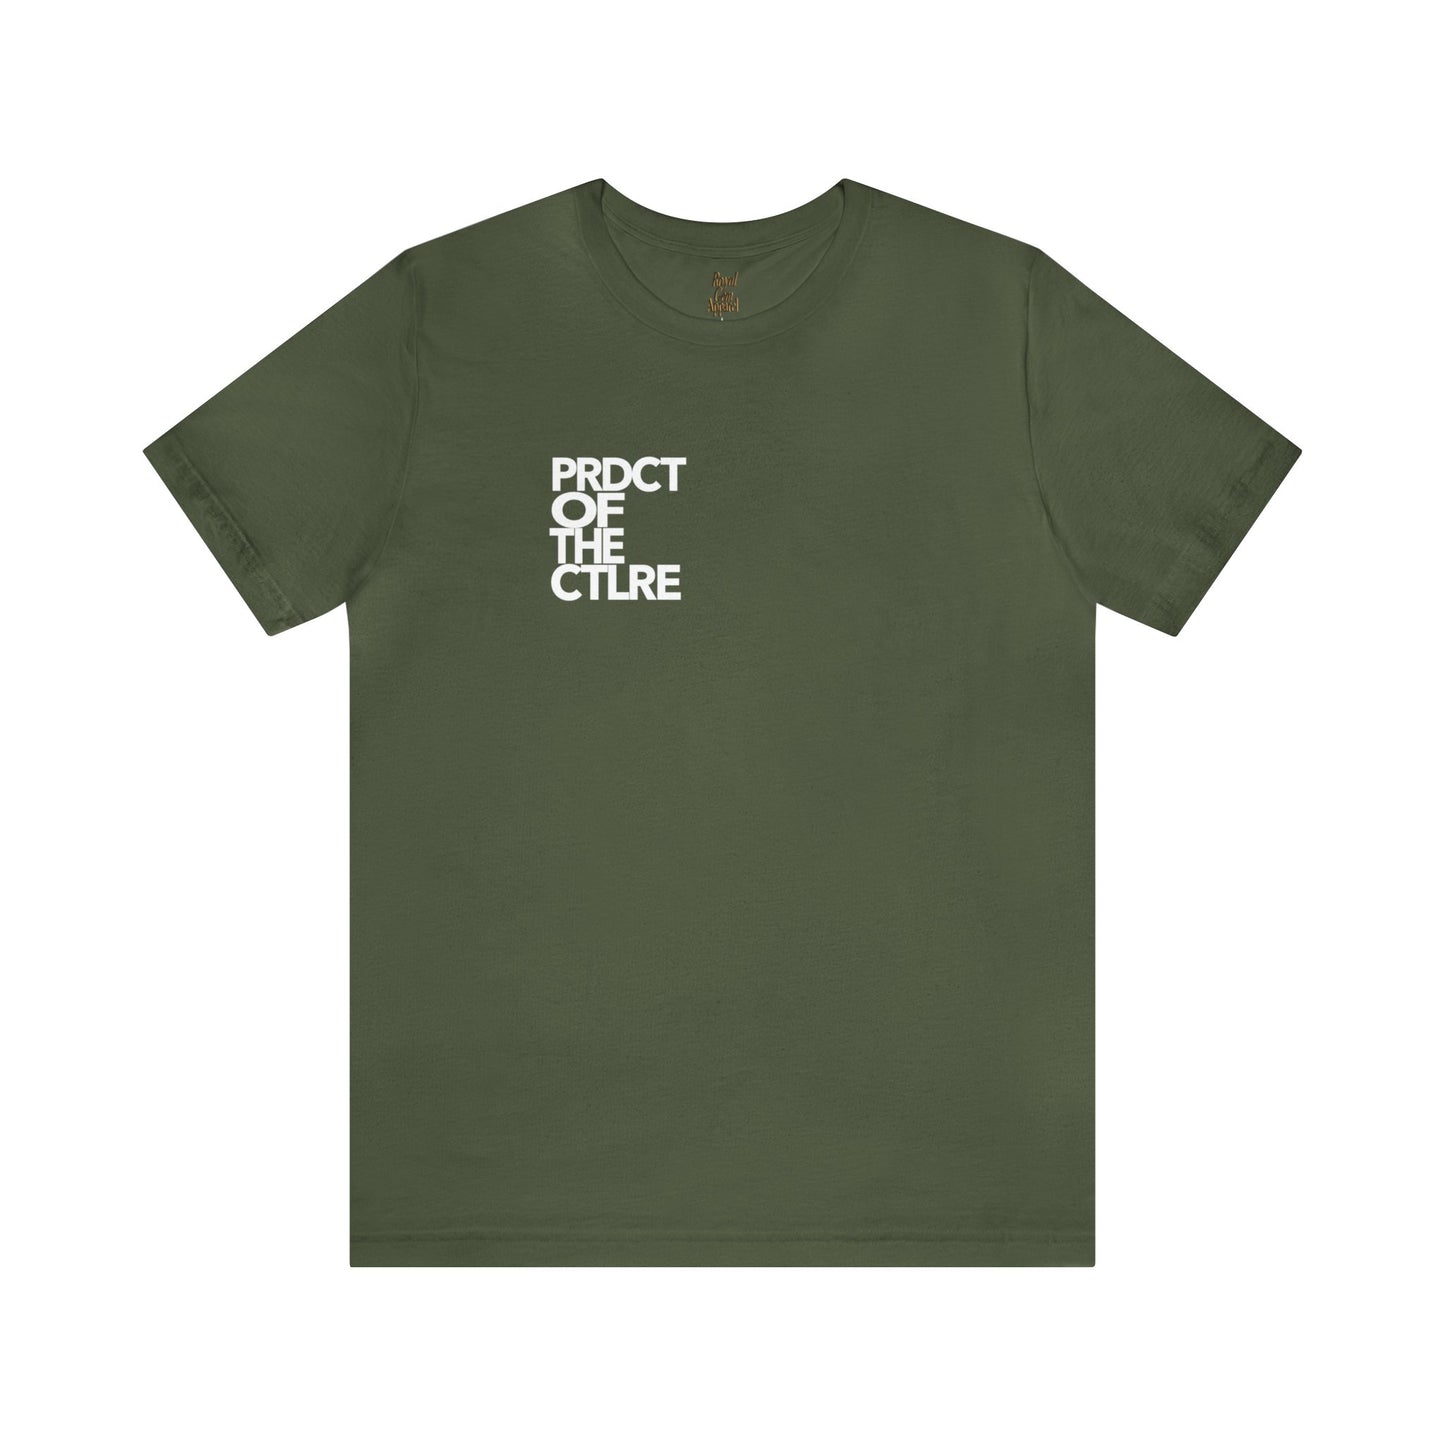 "Product of the Culture" Tee